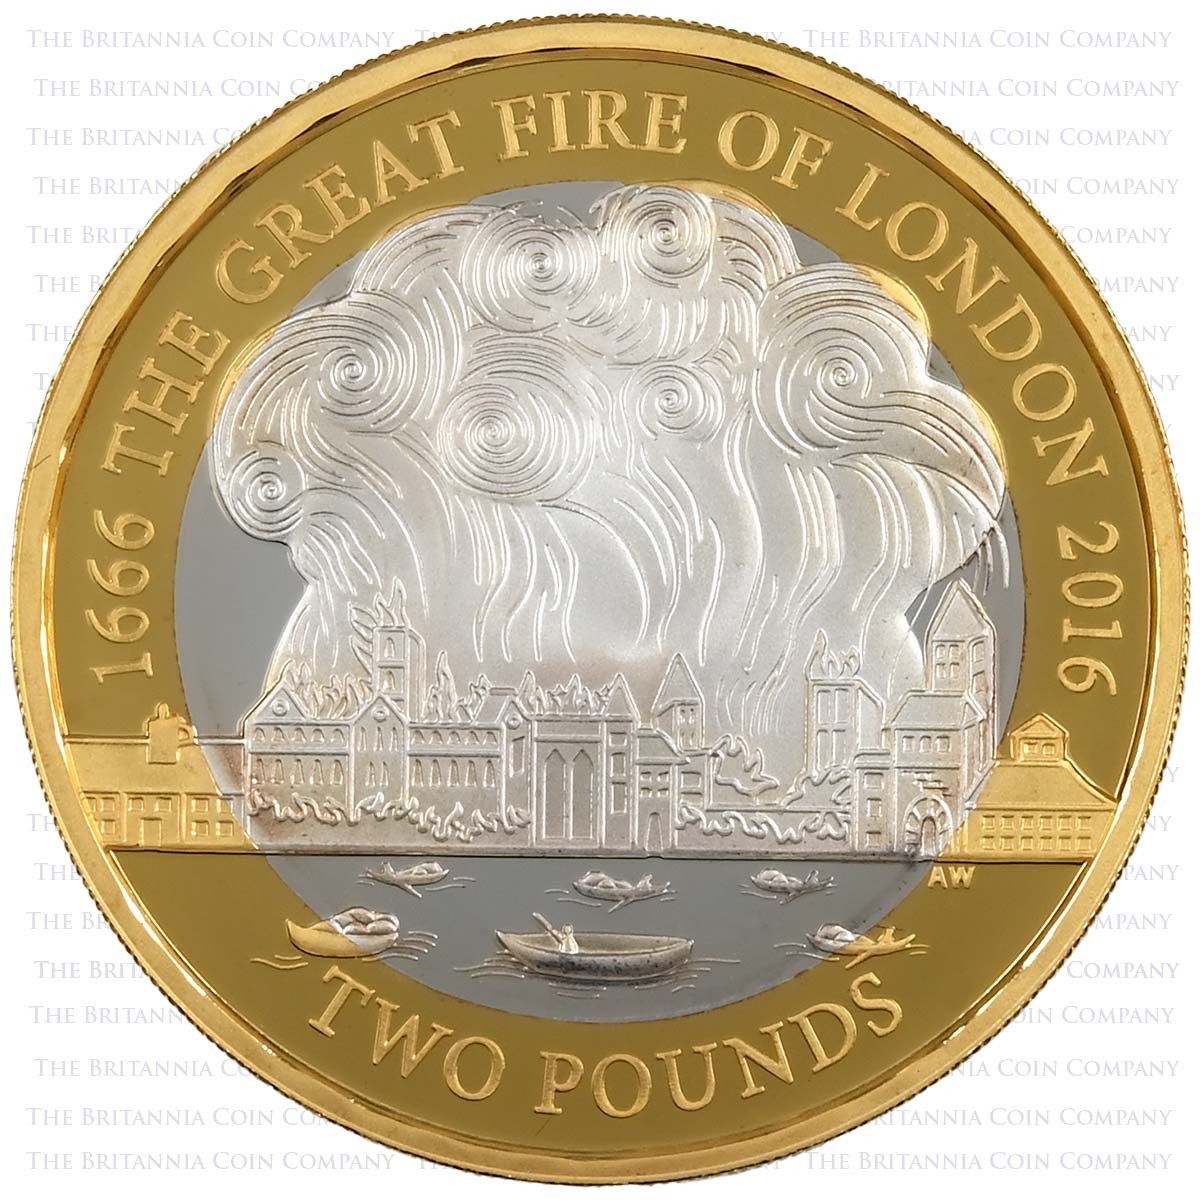 UK16GFSP 2016 Great Fire Of London 1666 Two Pound Silver Proof Coin Reverse